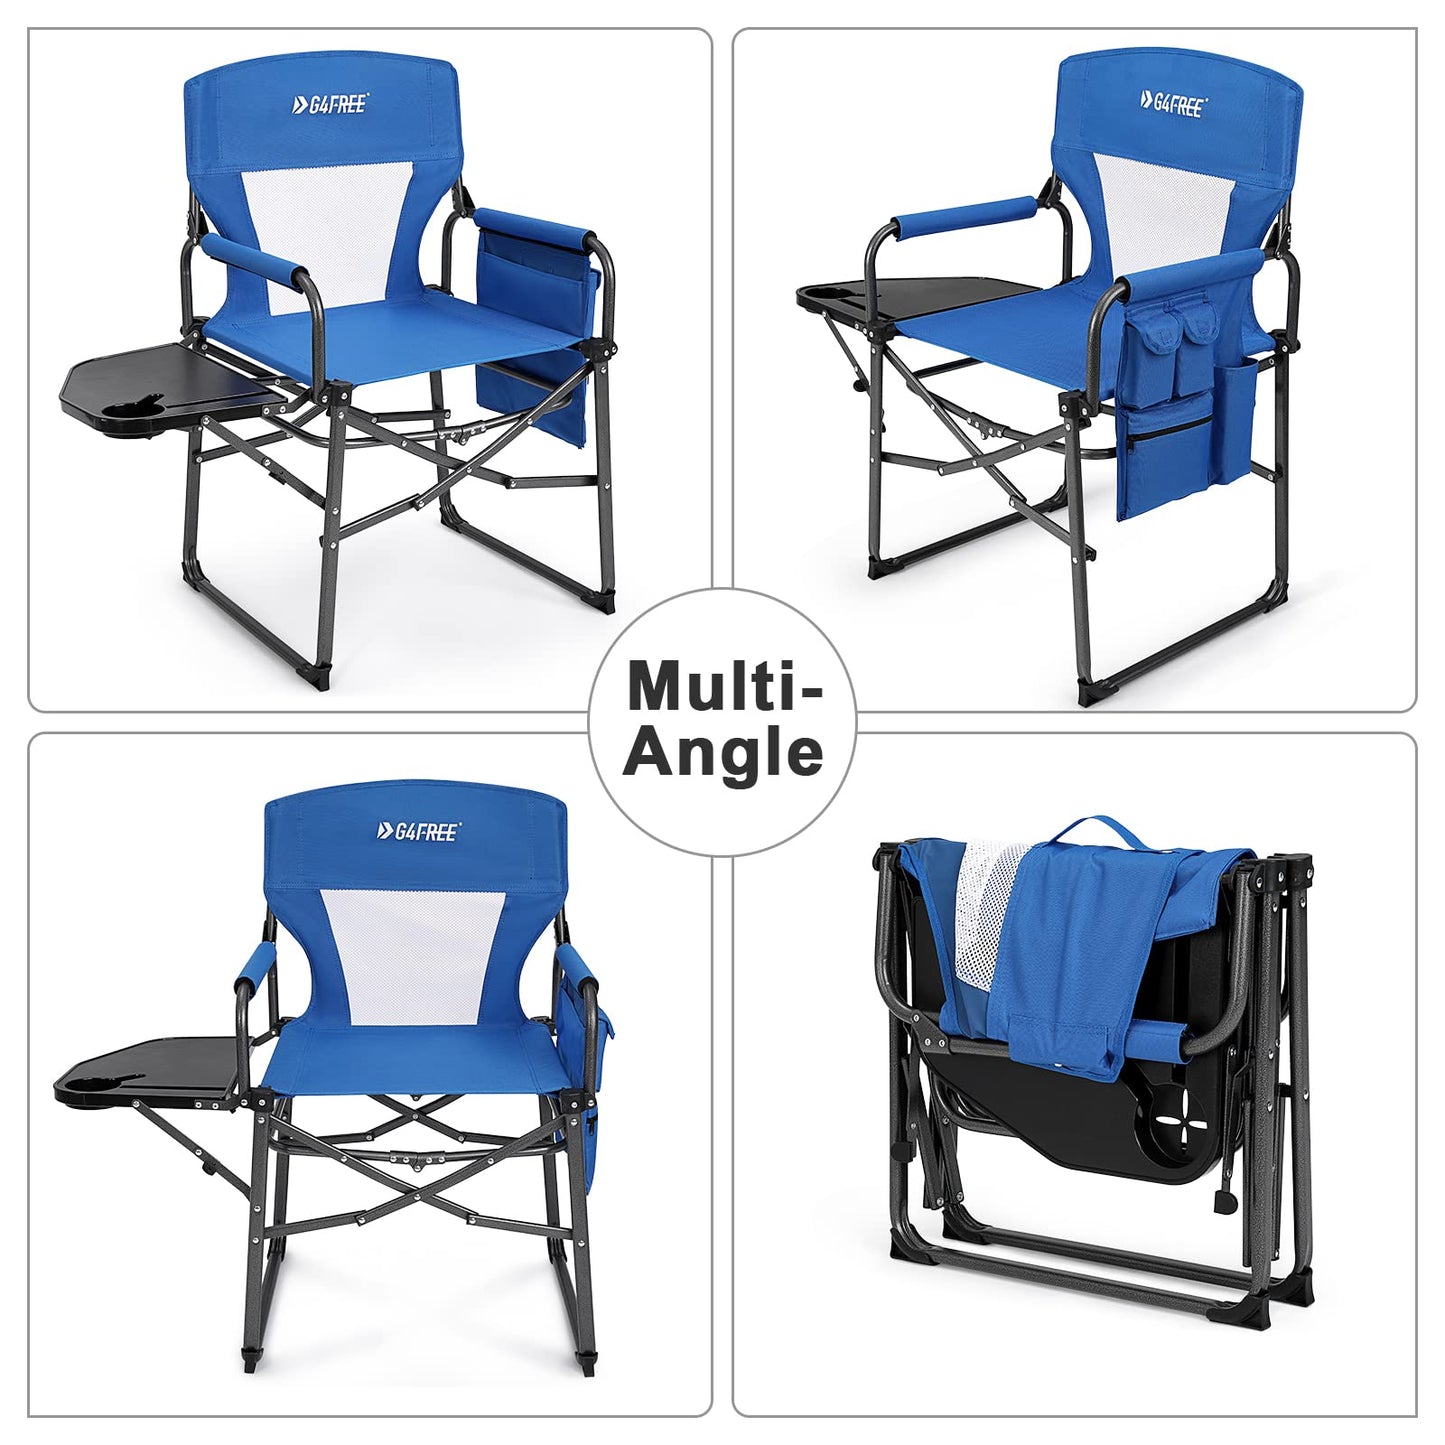 G4Free Heavy Duty Foldable Camping Chairs with Side Table Supports 300LBS